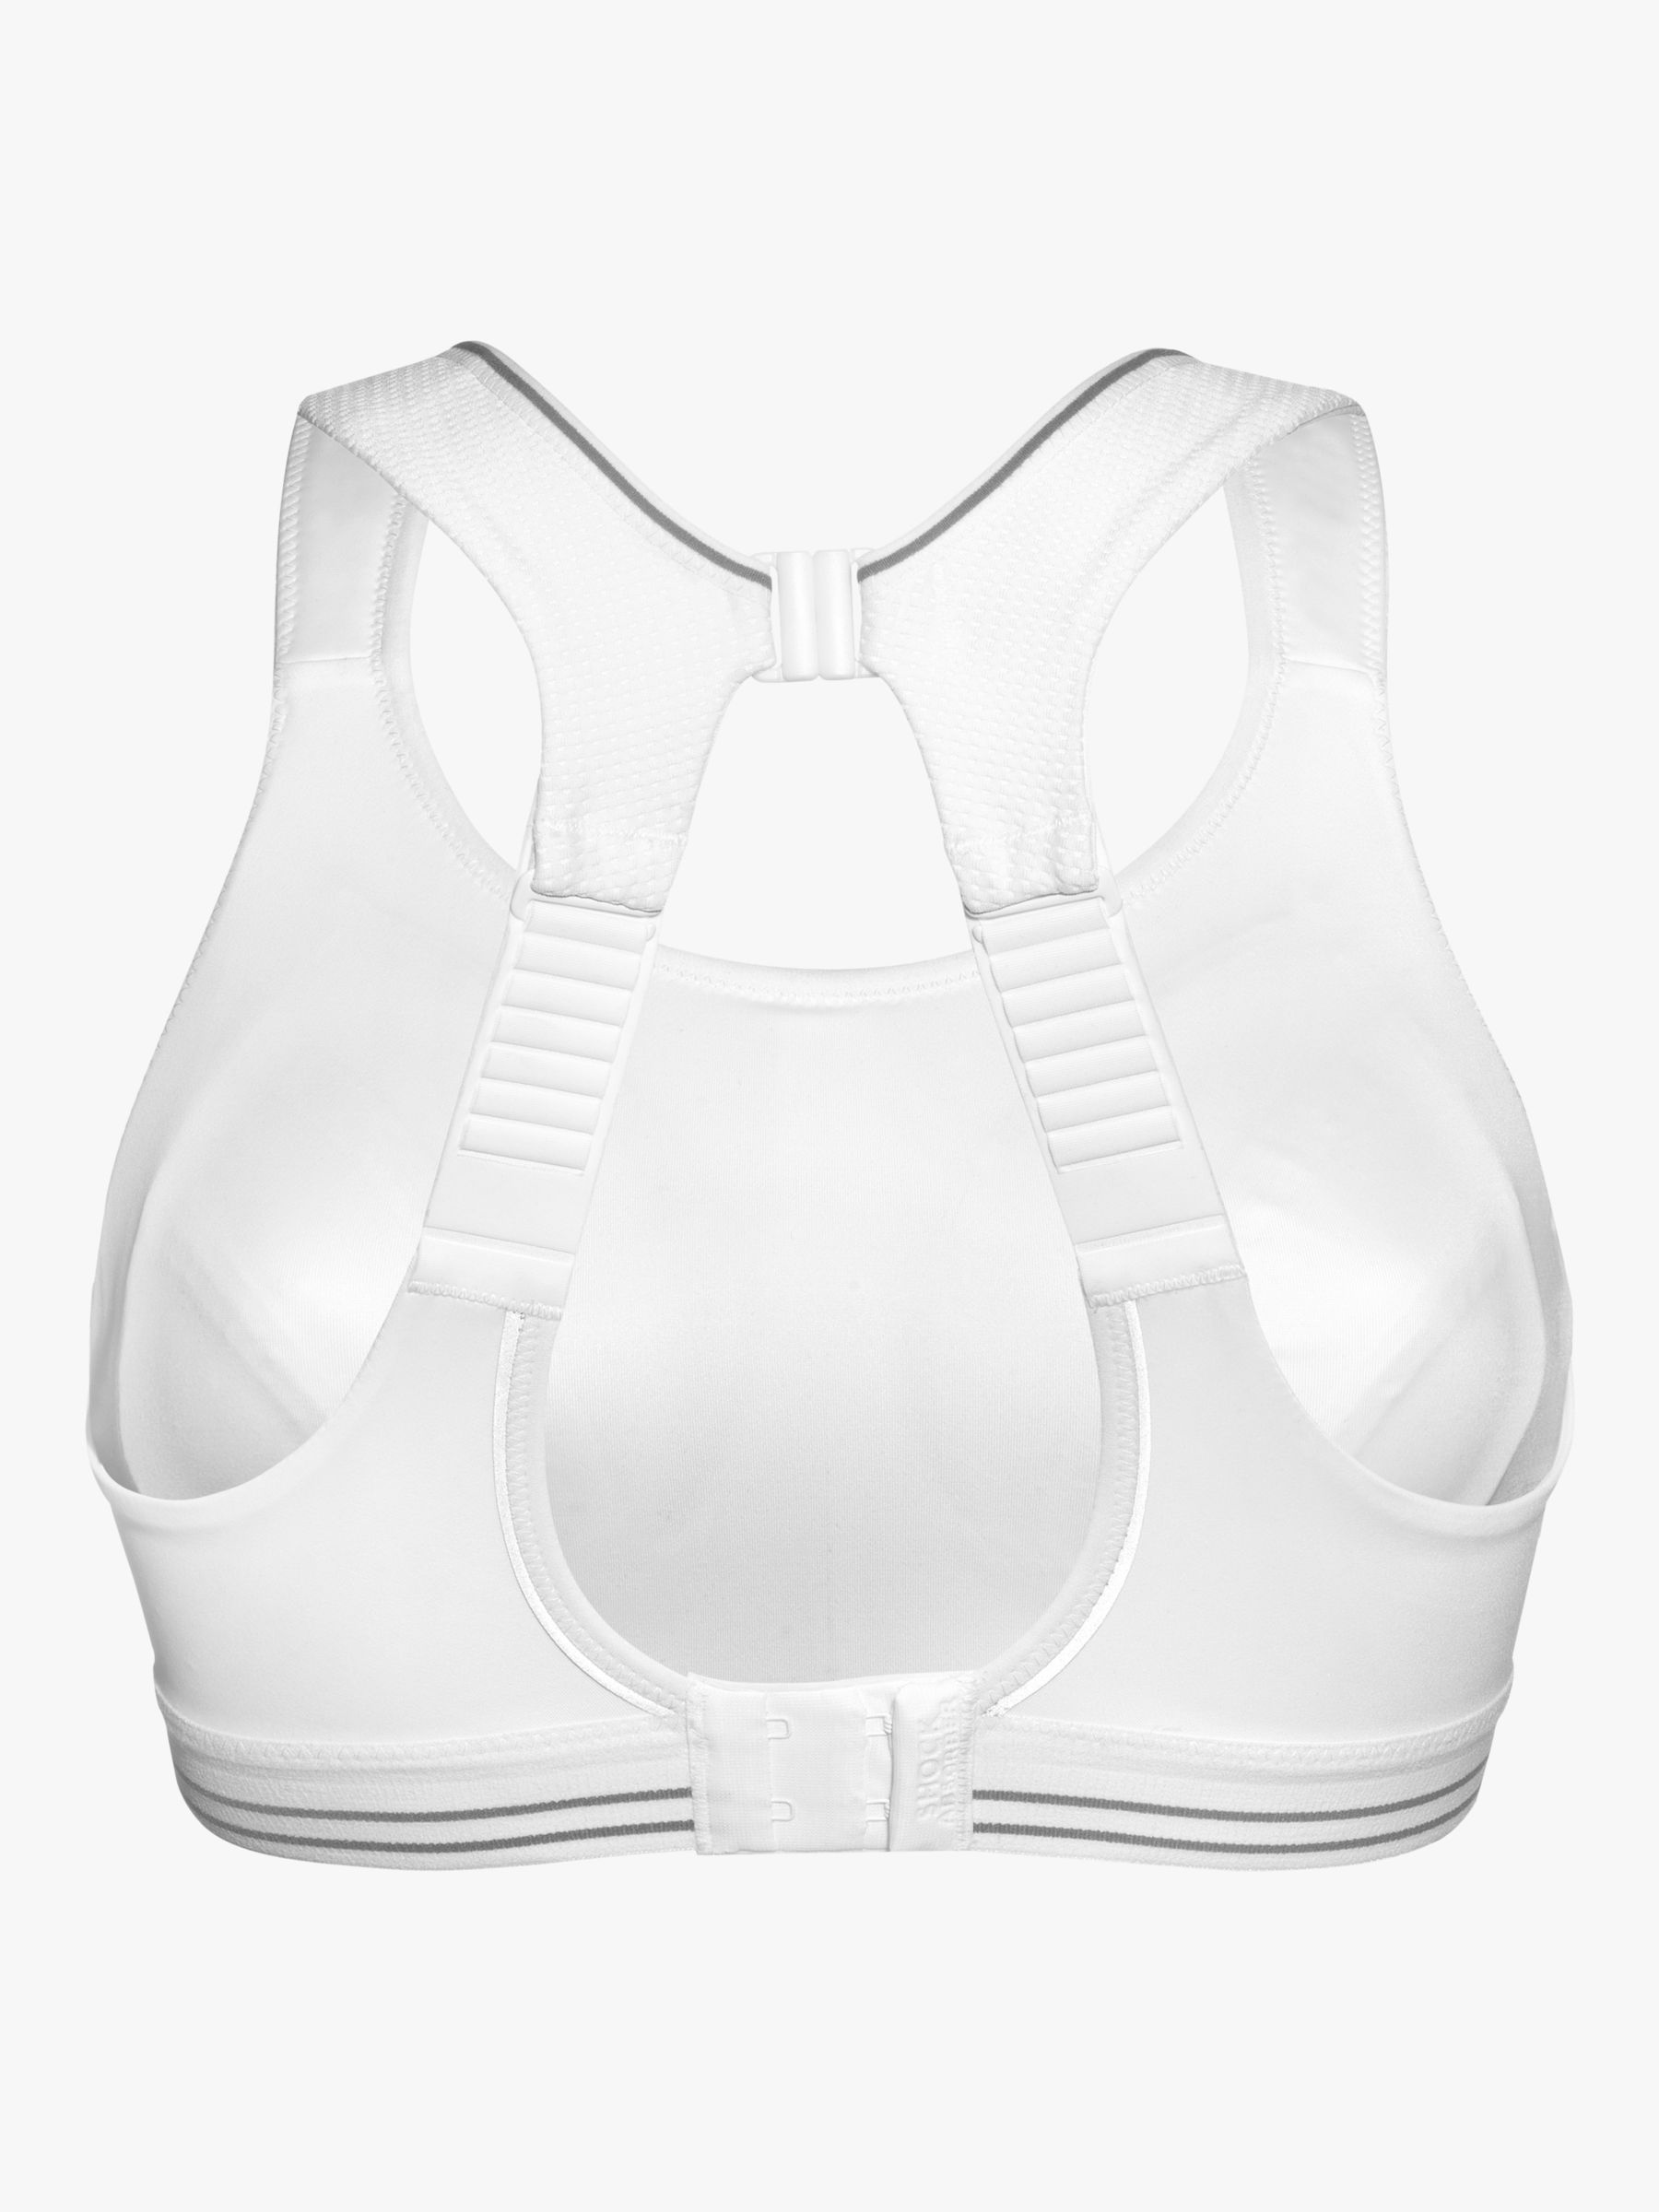 Shock Absorber Ultimate Run Sports Bra in White/Silver - Busted